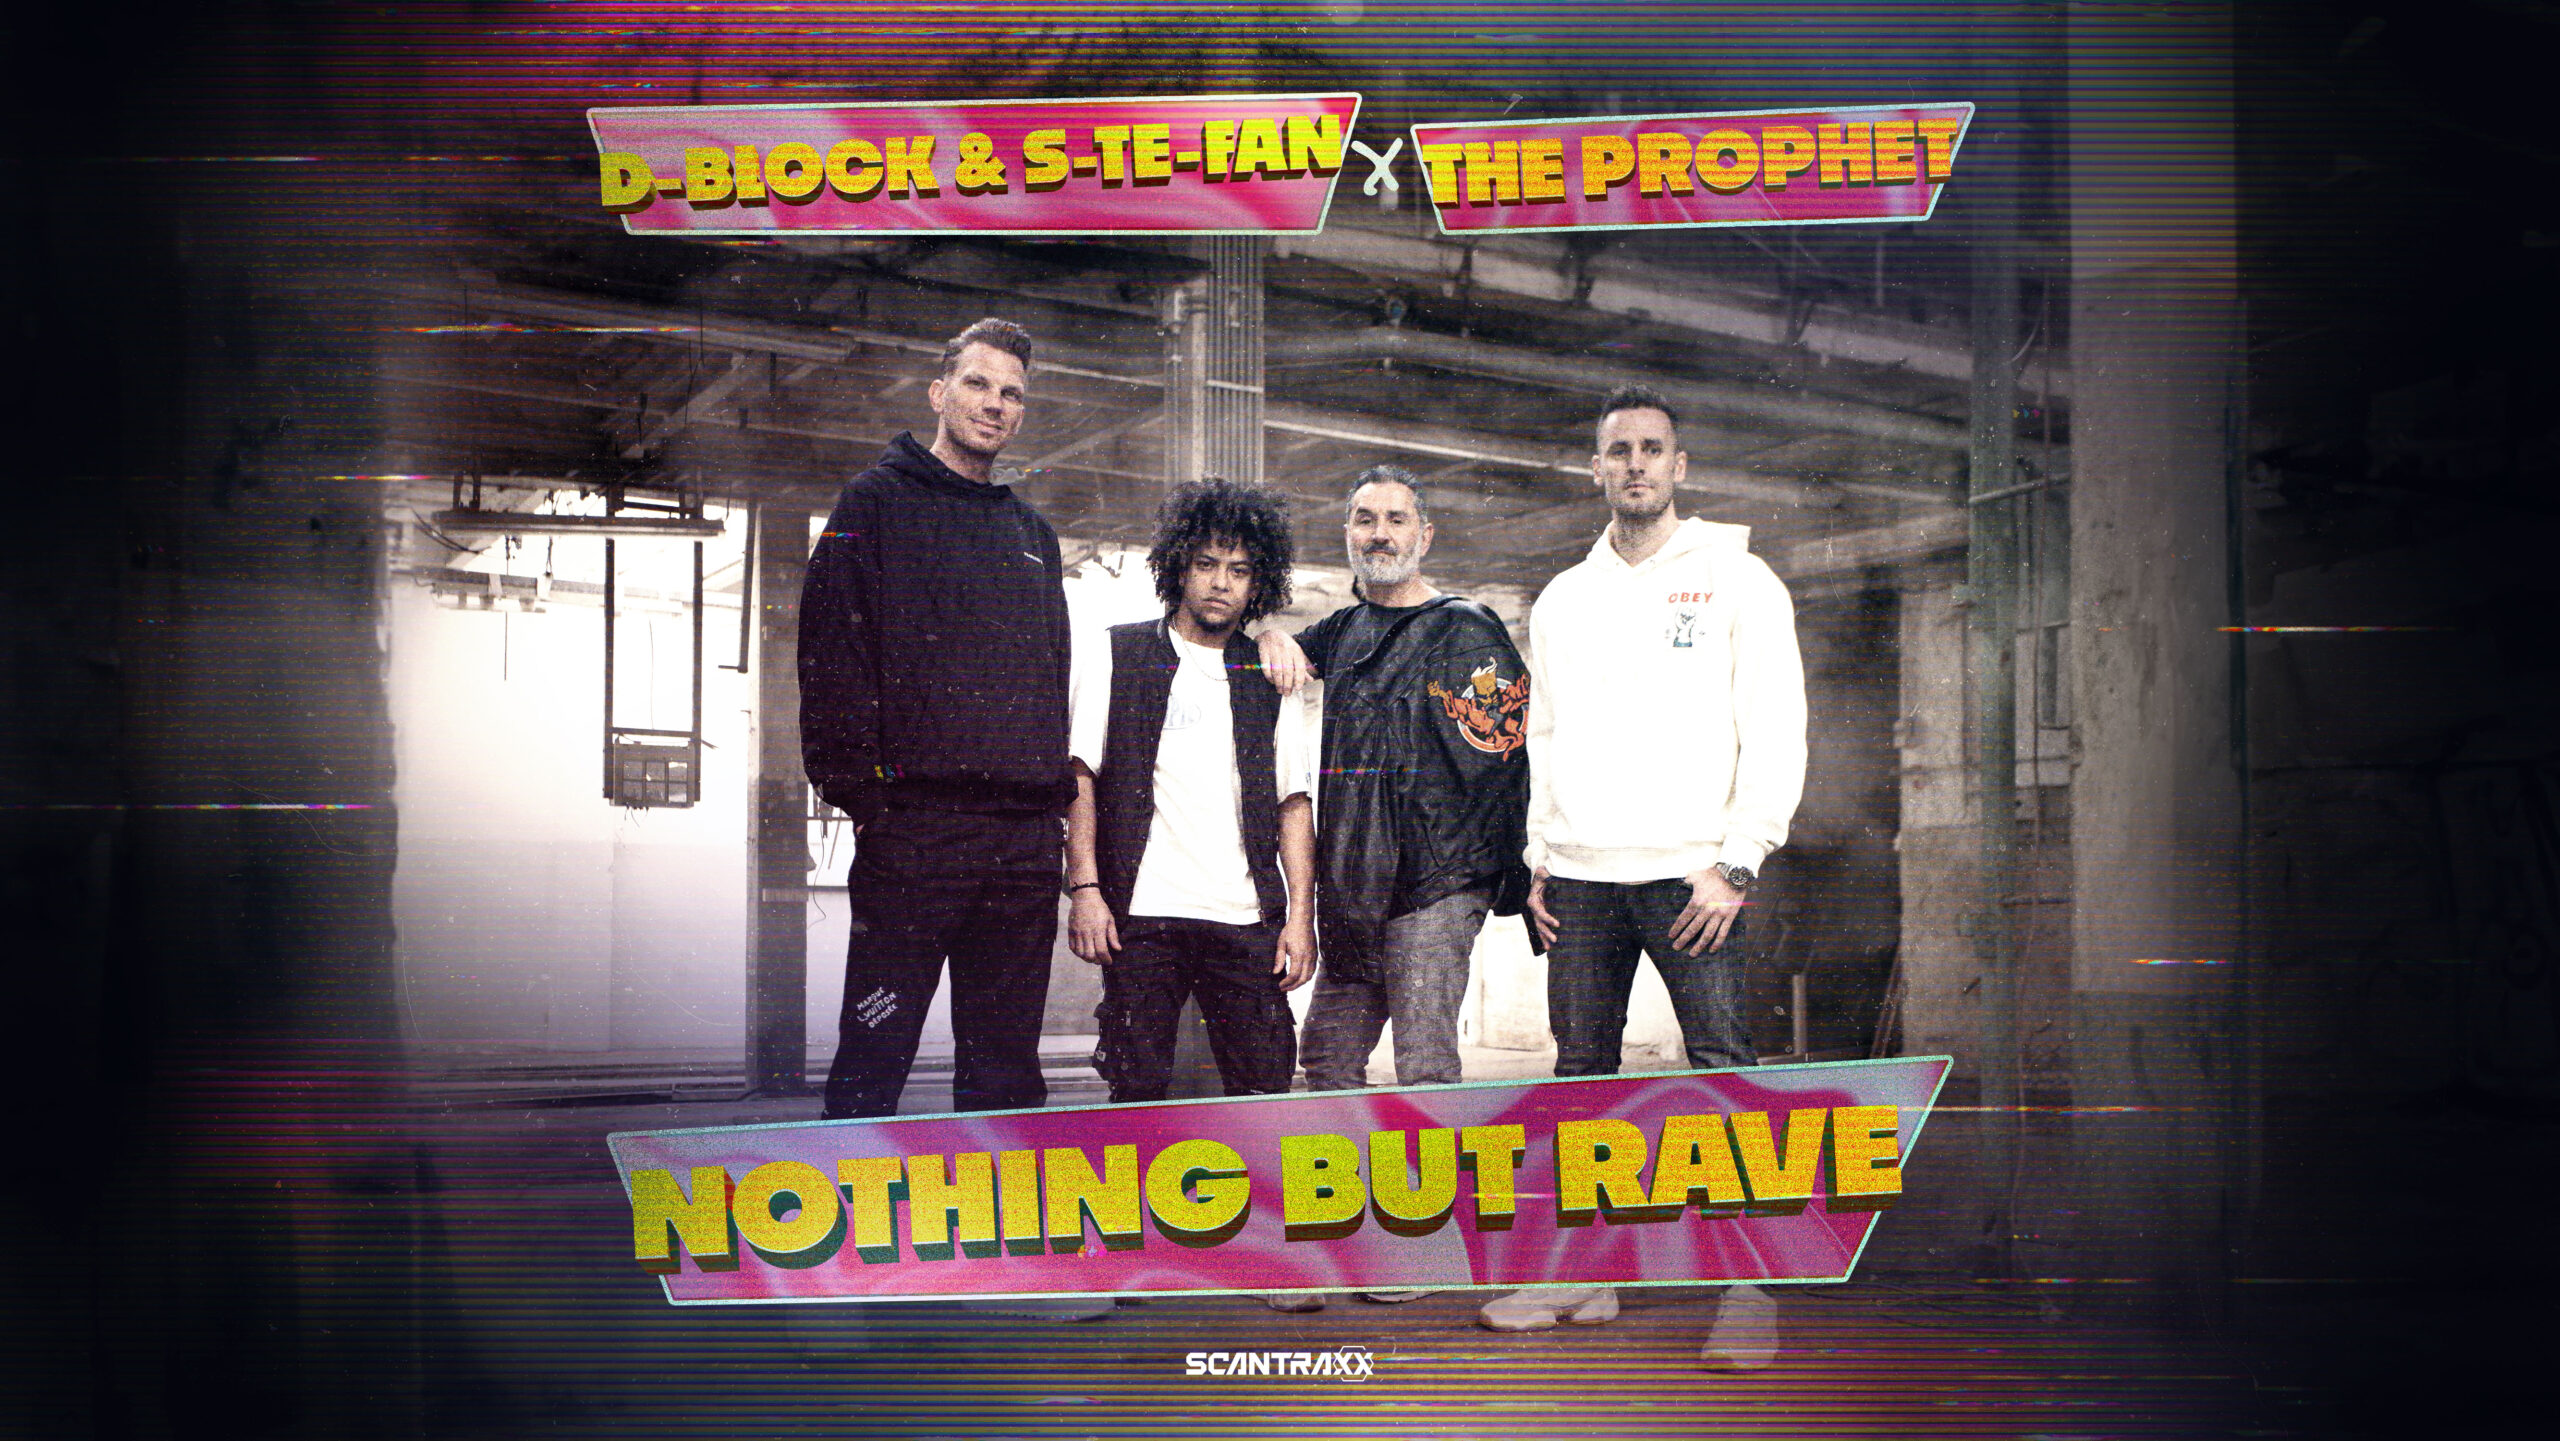 HARD DANCE’S BIGGEST COLLAB YET! D-BLOCK & S-TE-FAN TEAM UP WITH THE PROPHET ON ‘NOTHING BUT RAVE’ 